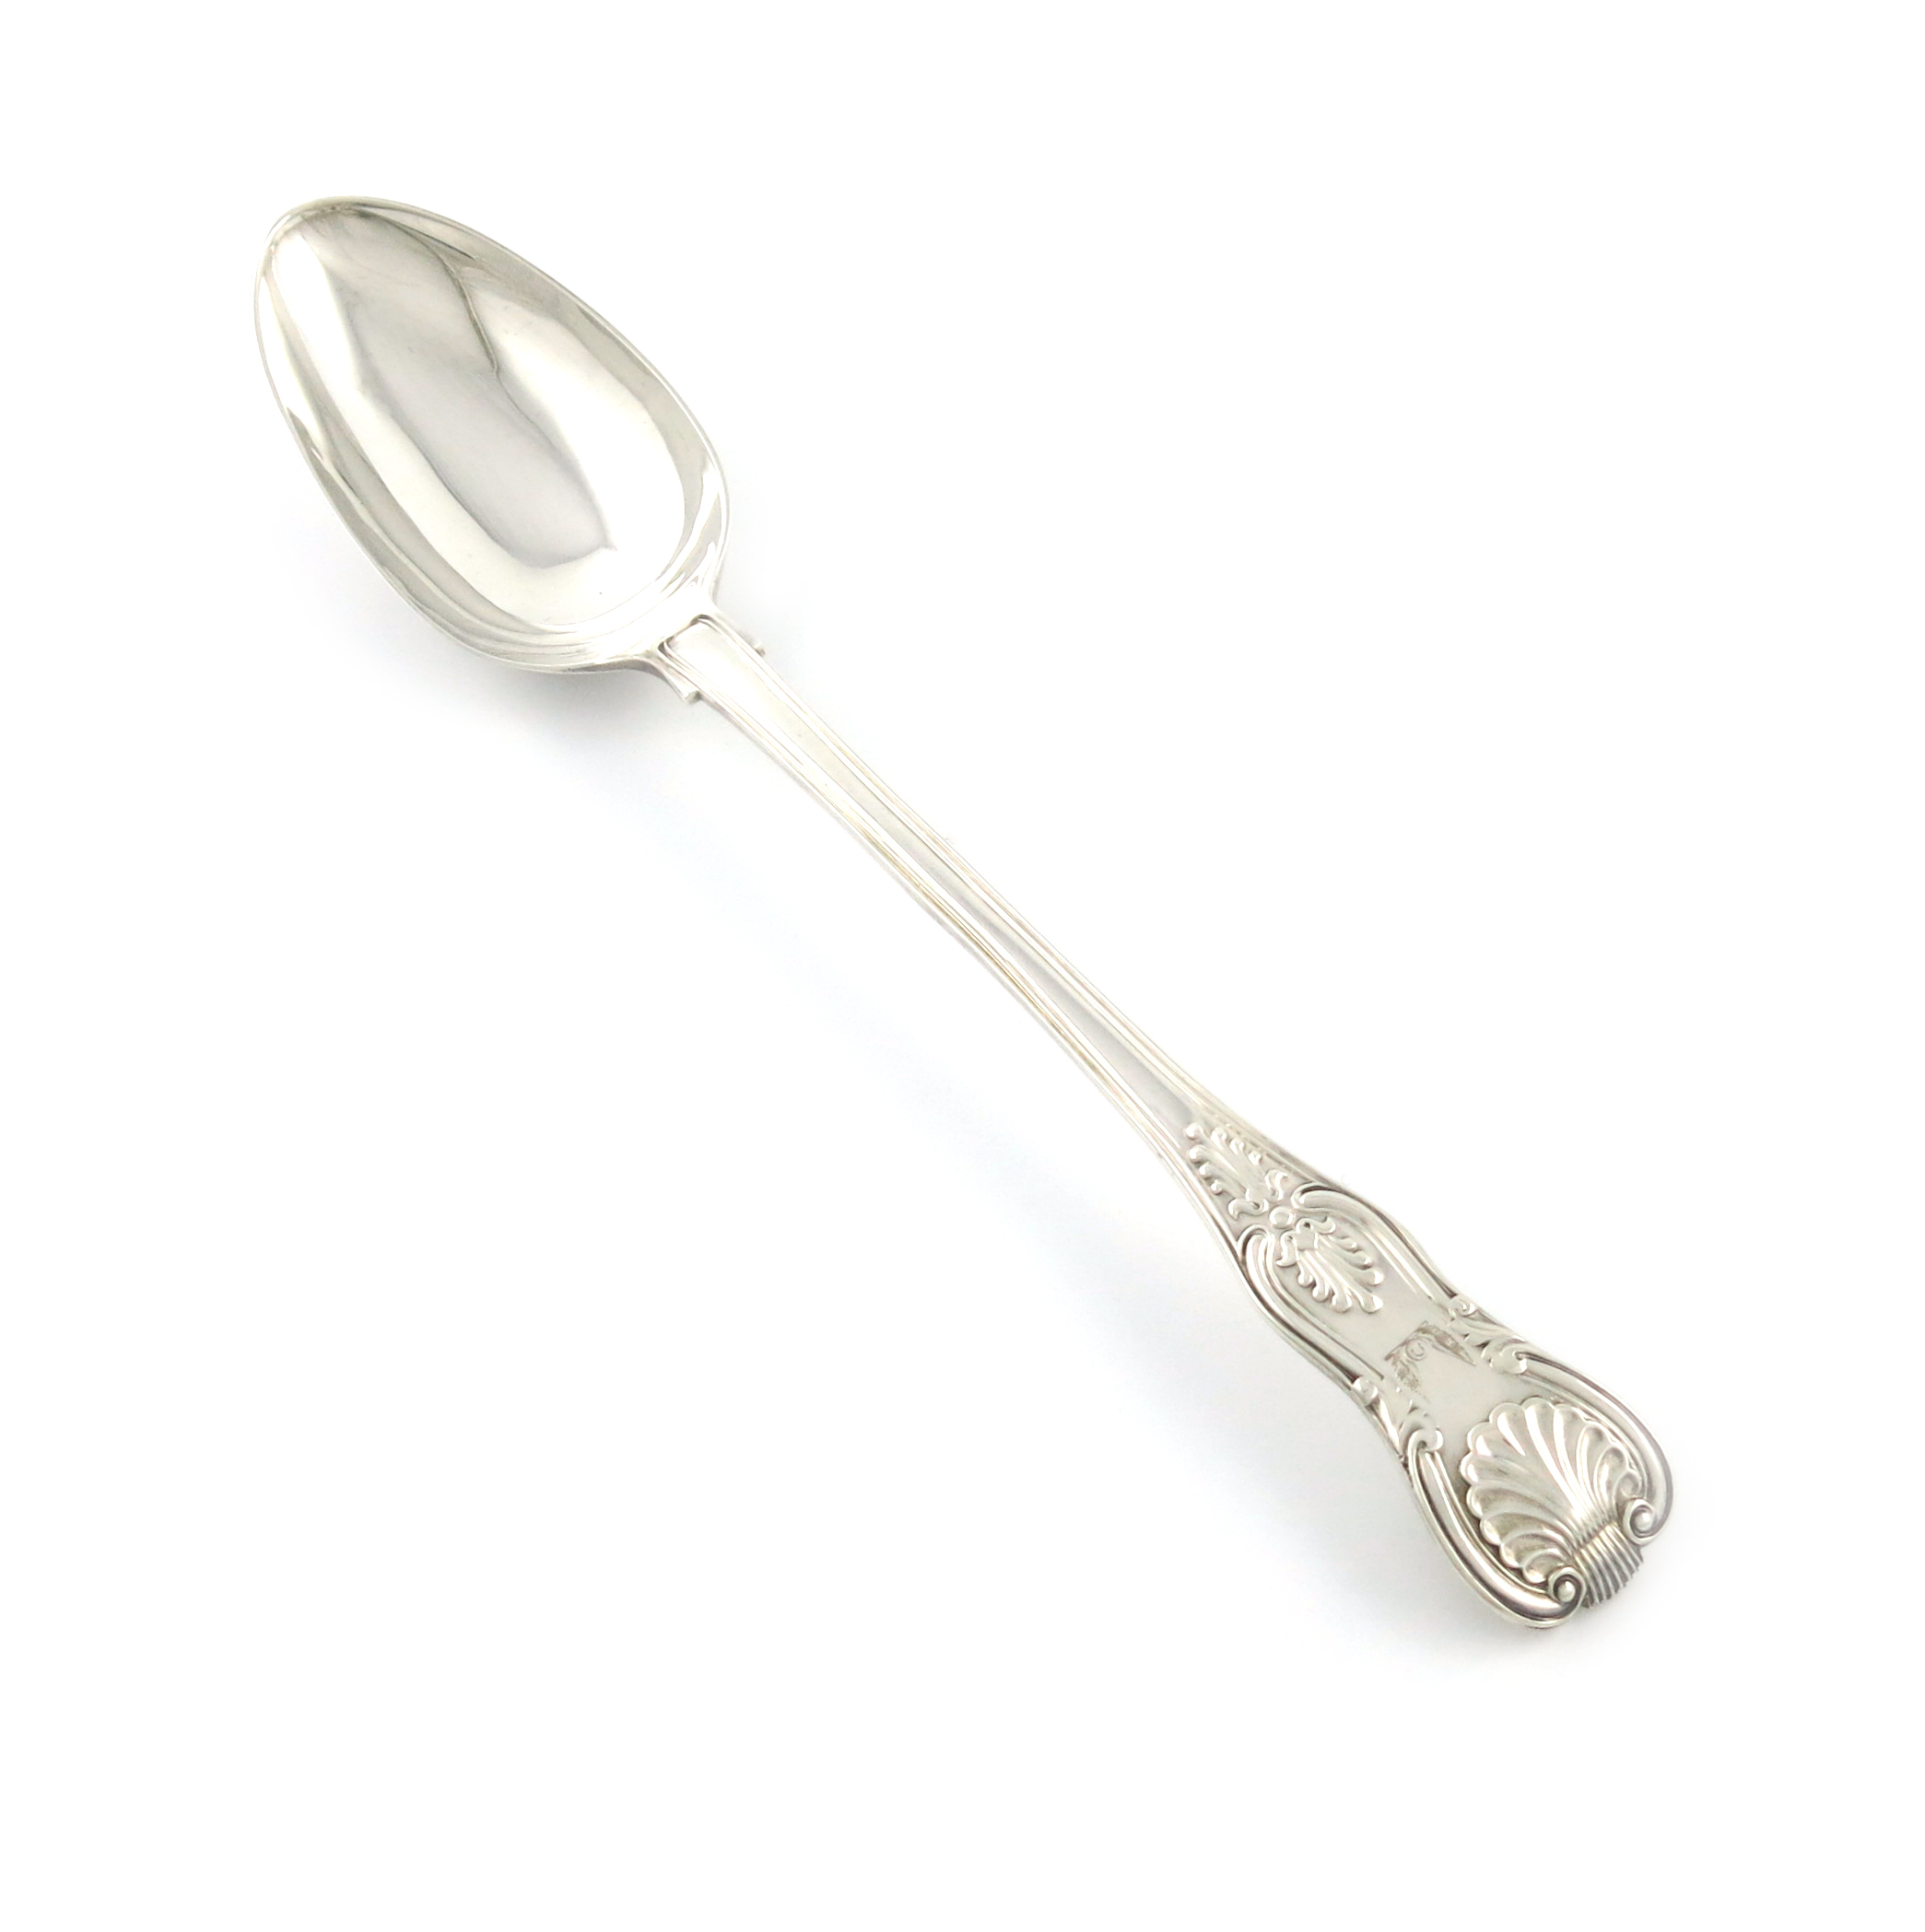 An early-Victorian silver King's pattern basting spoon, by Mary Chawner, London 1838, the terminal